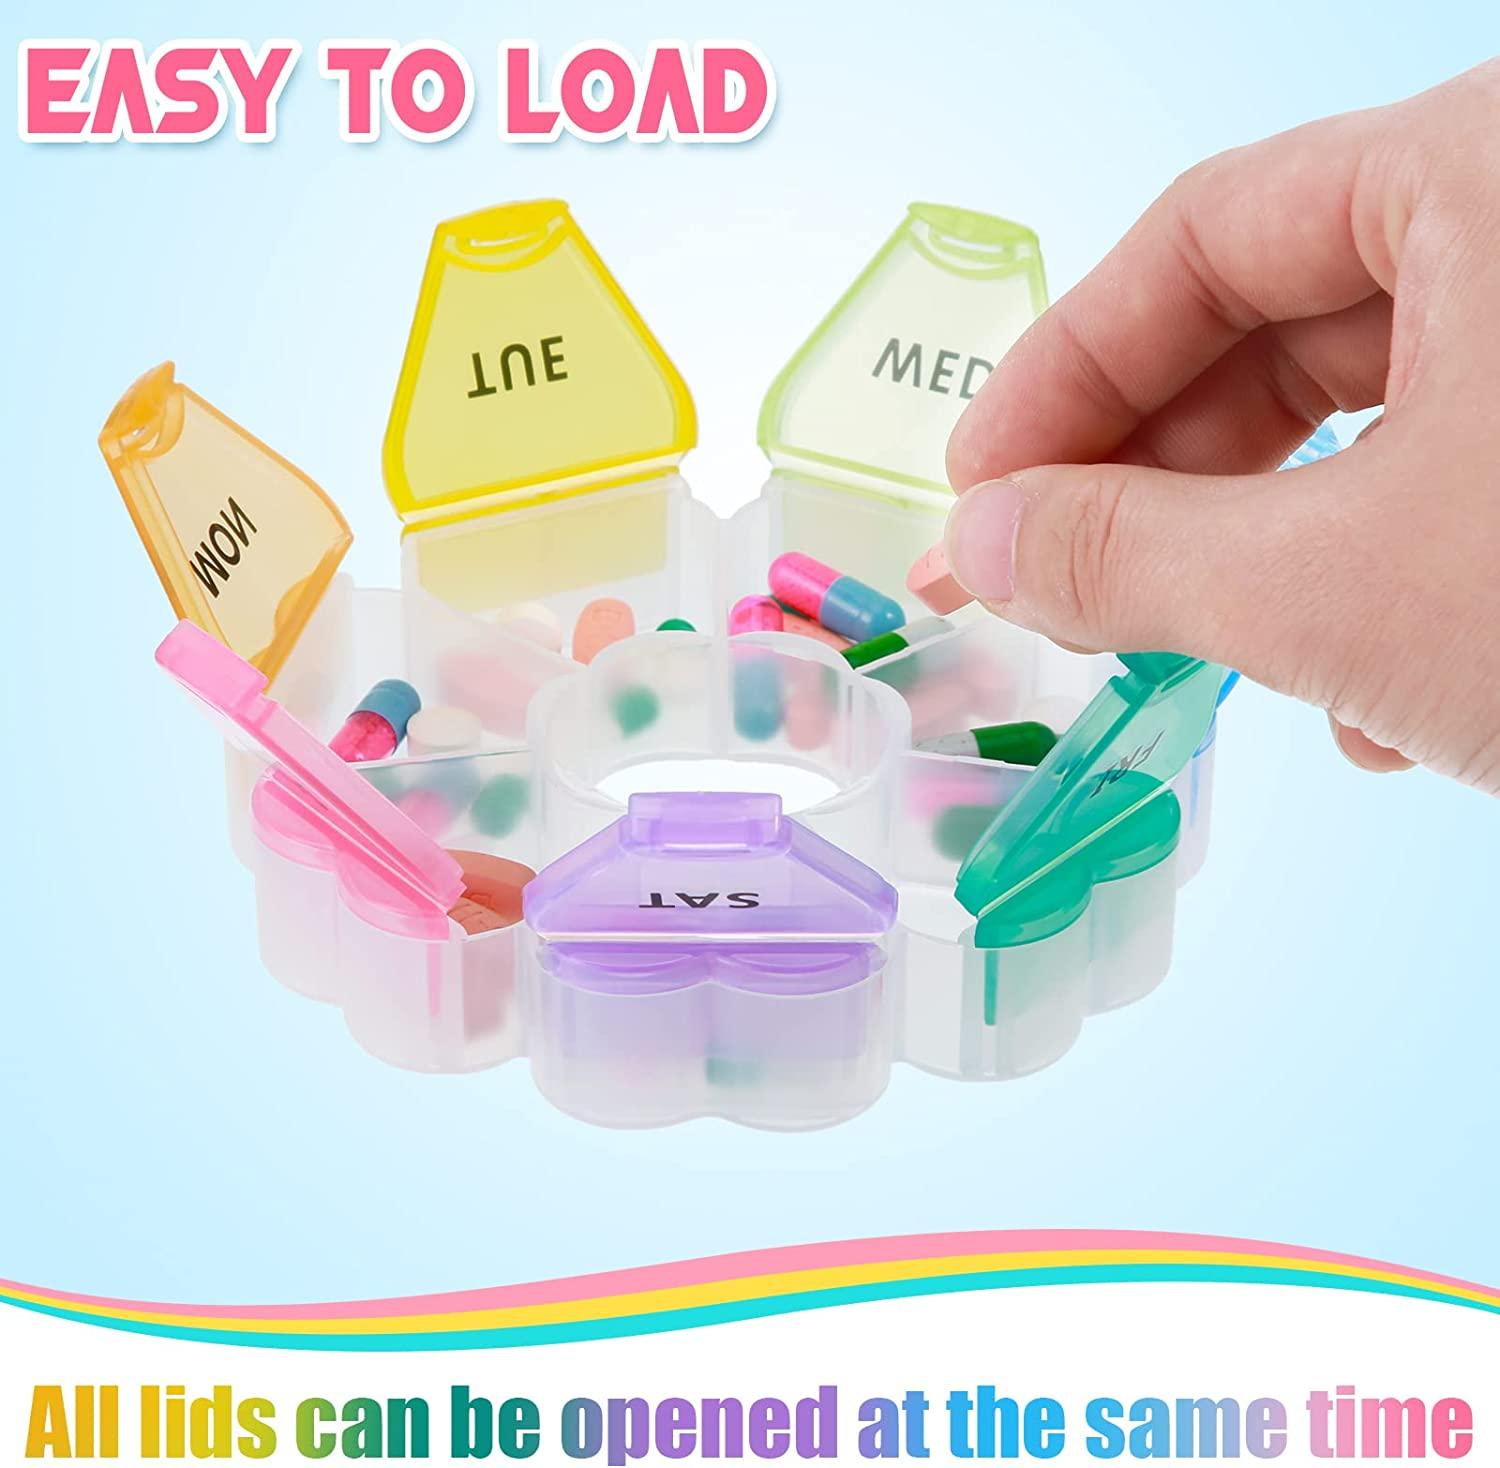 Travel Weekly Pill Organizer, Colorwing Stylish Pretty Pill Box 7 Day, Cute  Daily Pill Case Holder to Medication, Supplements, Tablets, Great for